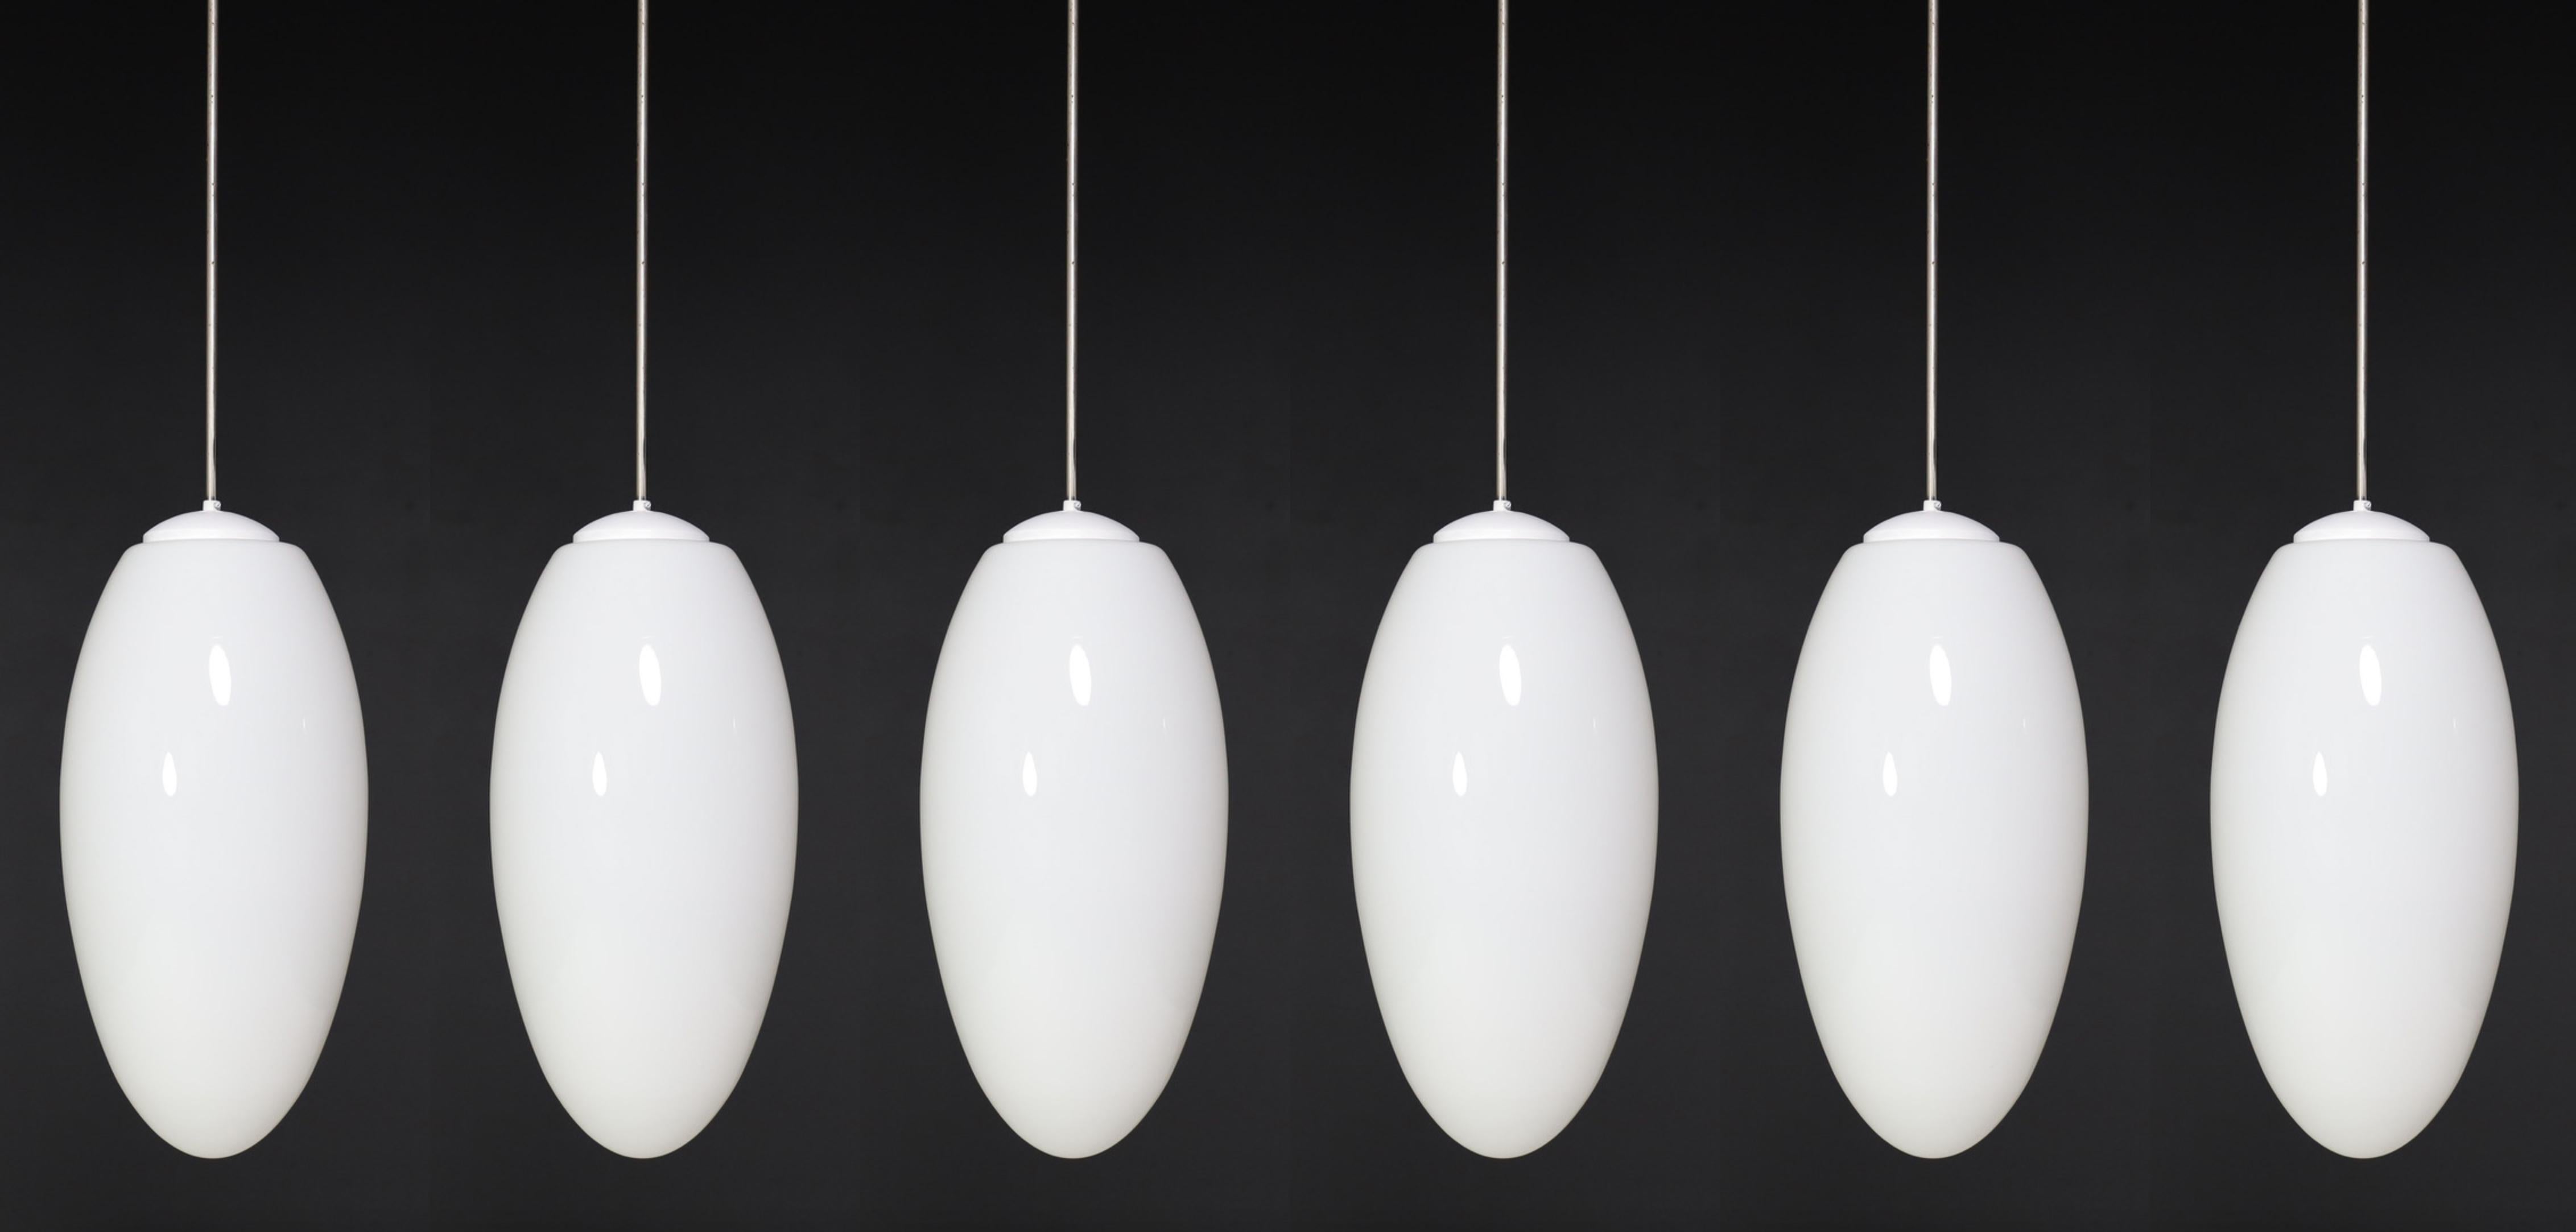 Large set pendants, ellipse opaline glass, Europe, the 1960s.

An extensive set of pendants, ellipse opaline glass, Europe, the 1960s. The diffuse light it spreads is very atmospheric. Completed with opaline glass and metal frame details, these